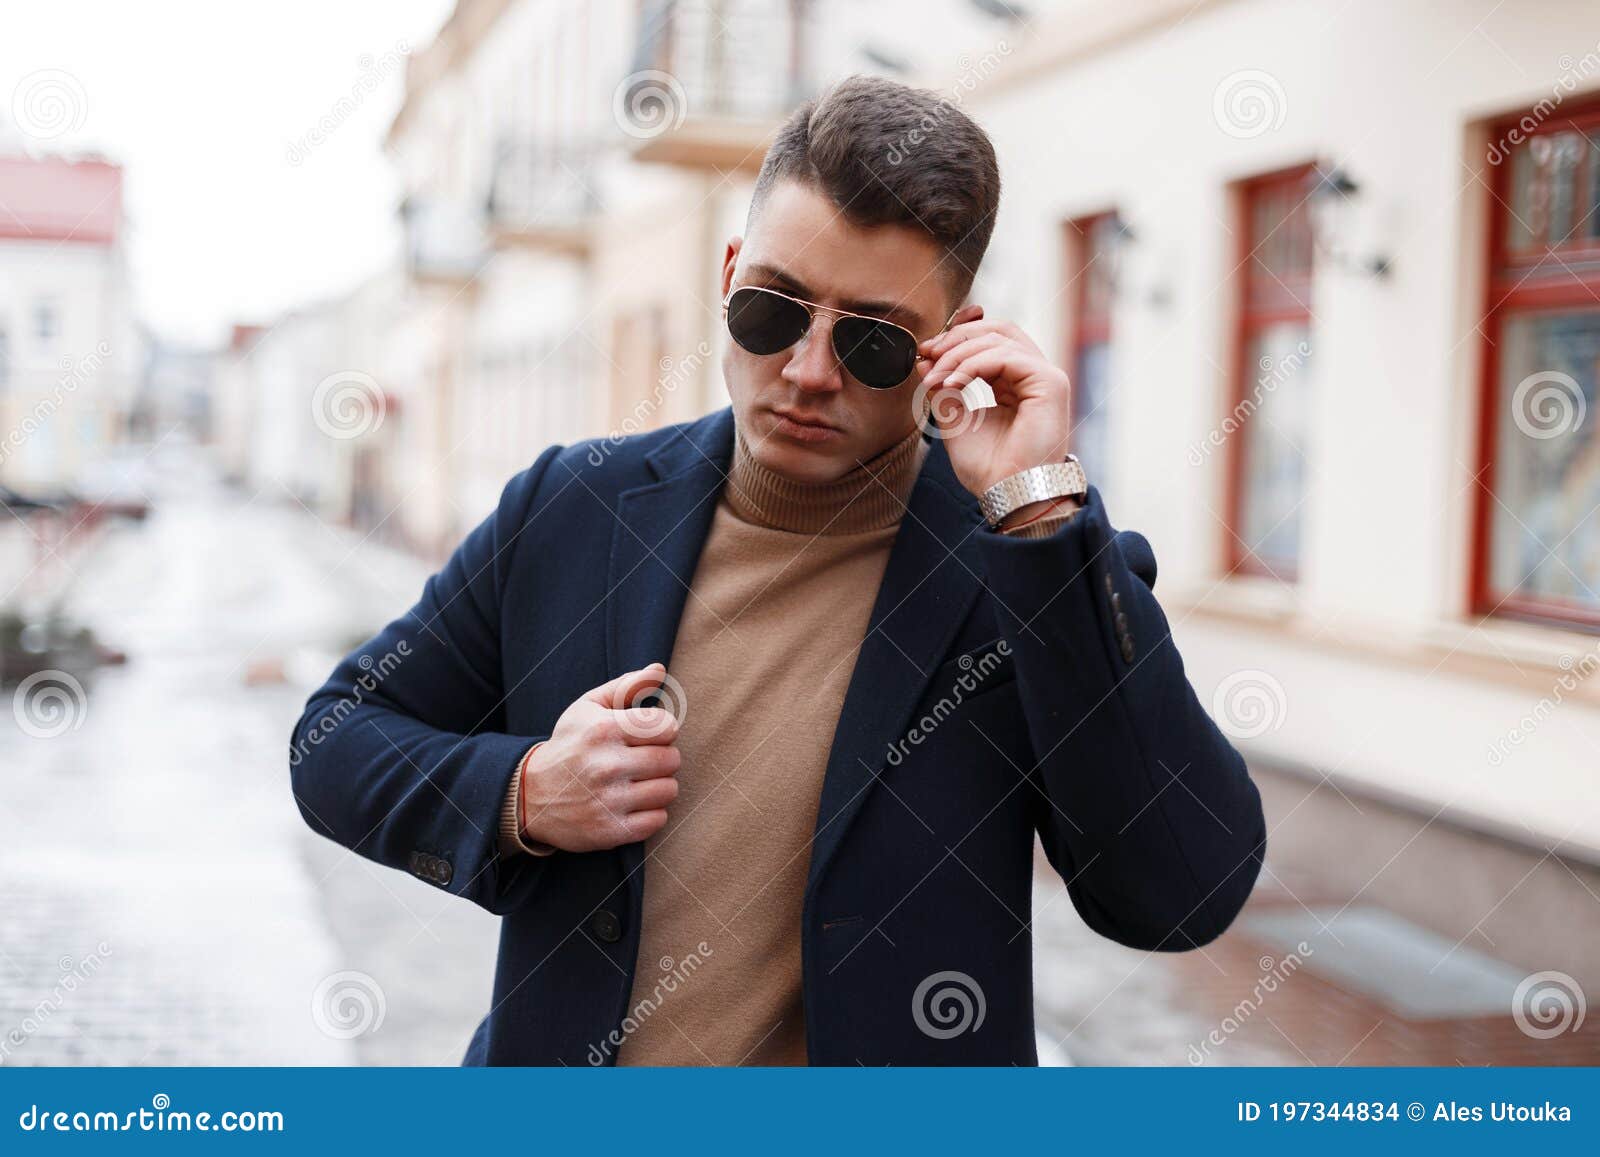 Handsome Successful Young Businessman in an Elegant Coat with Silver Clock  in Sunglasses in a Knitted Warm Sweater with a Stylish Stock Photo - Image  of american, knitted: 197344834